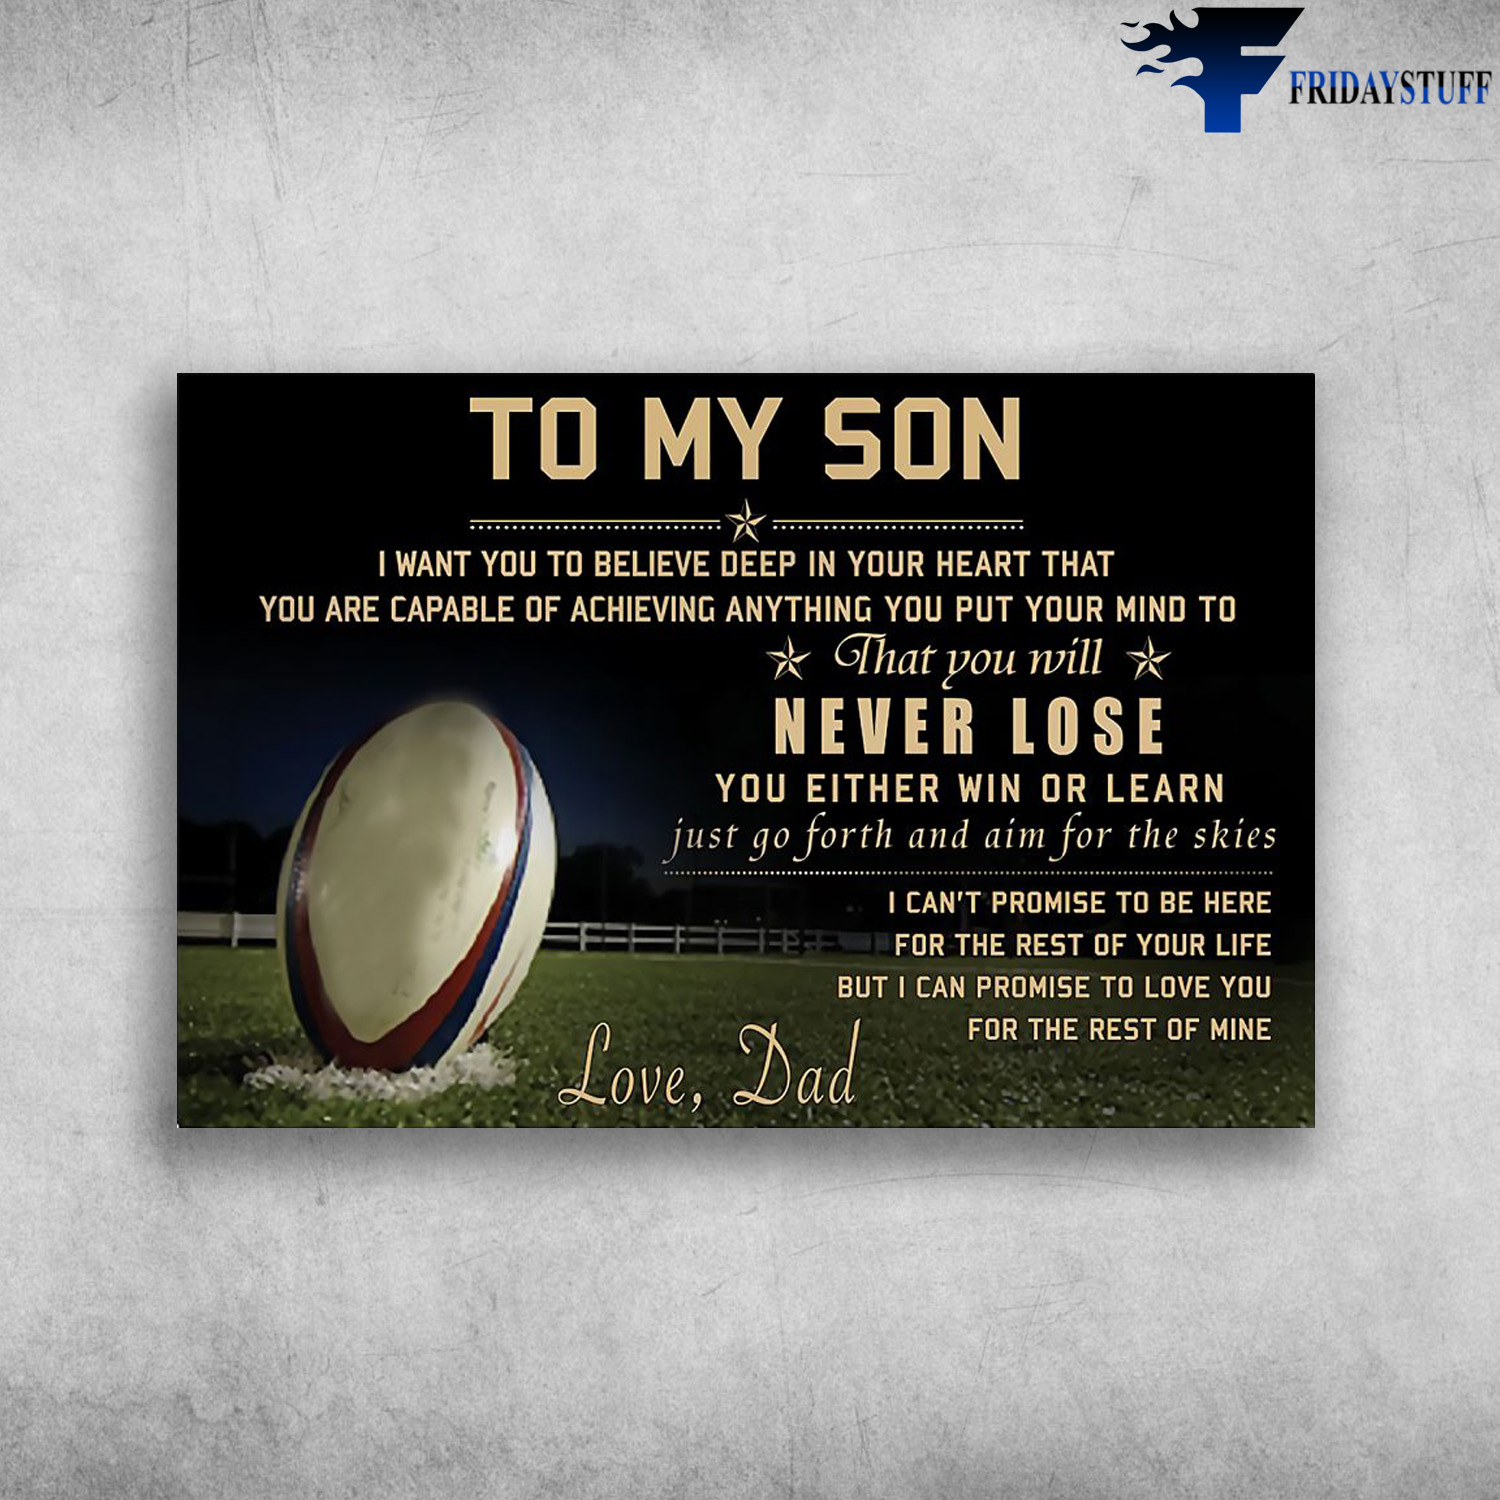 Dad And Son Rugby - To My Son, I Want You To Believe Deep In Your Heart, That You Are Capable Of Achieving, Anything You Put Your Mind, To That You Will Never Lose, You Either Win Or Learn